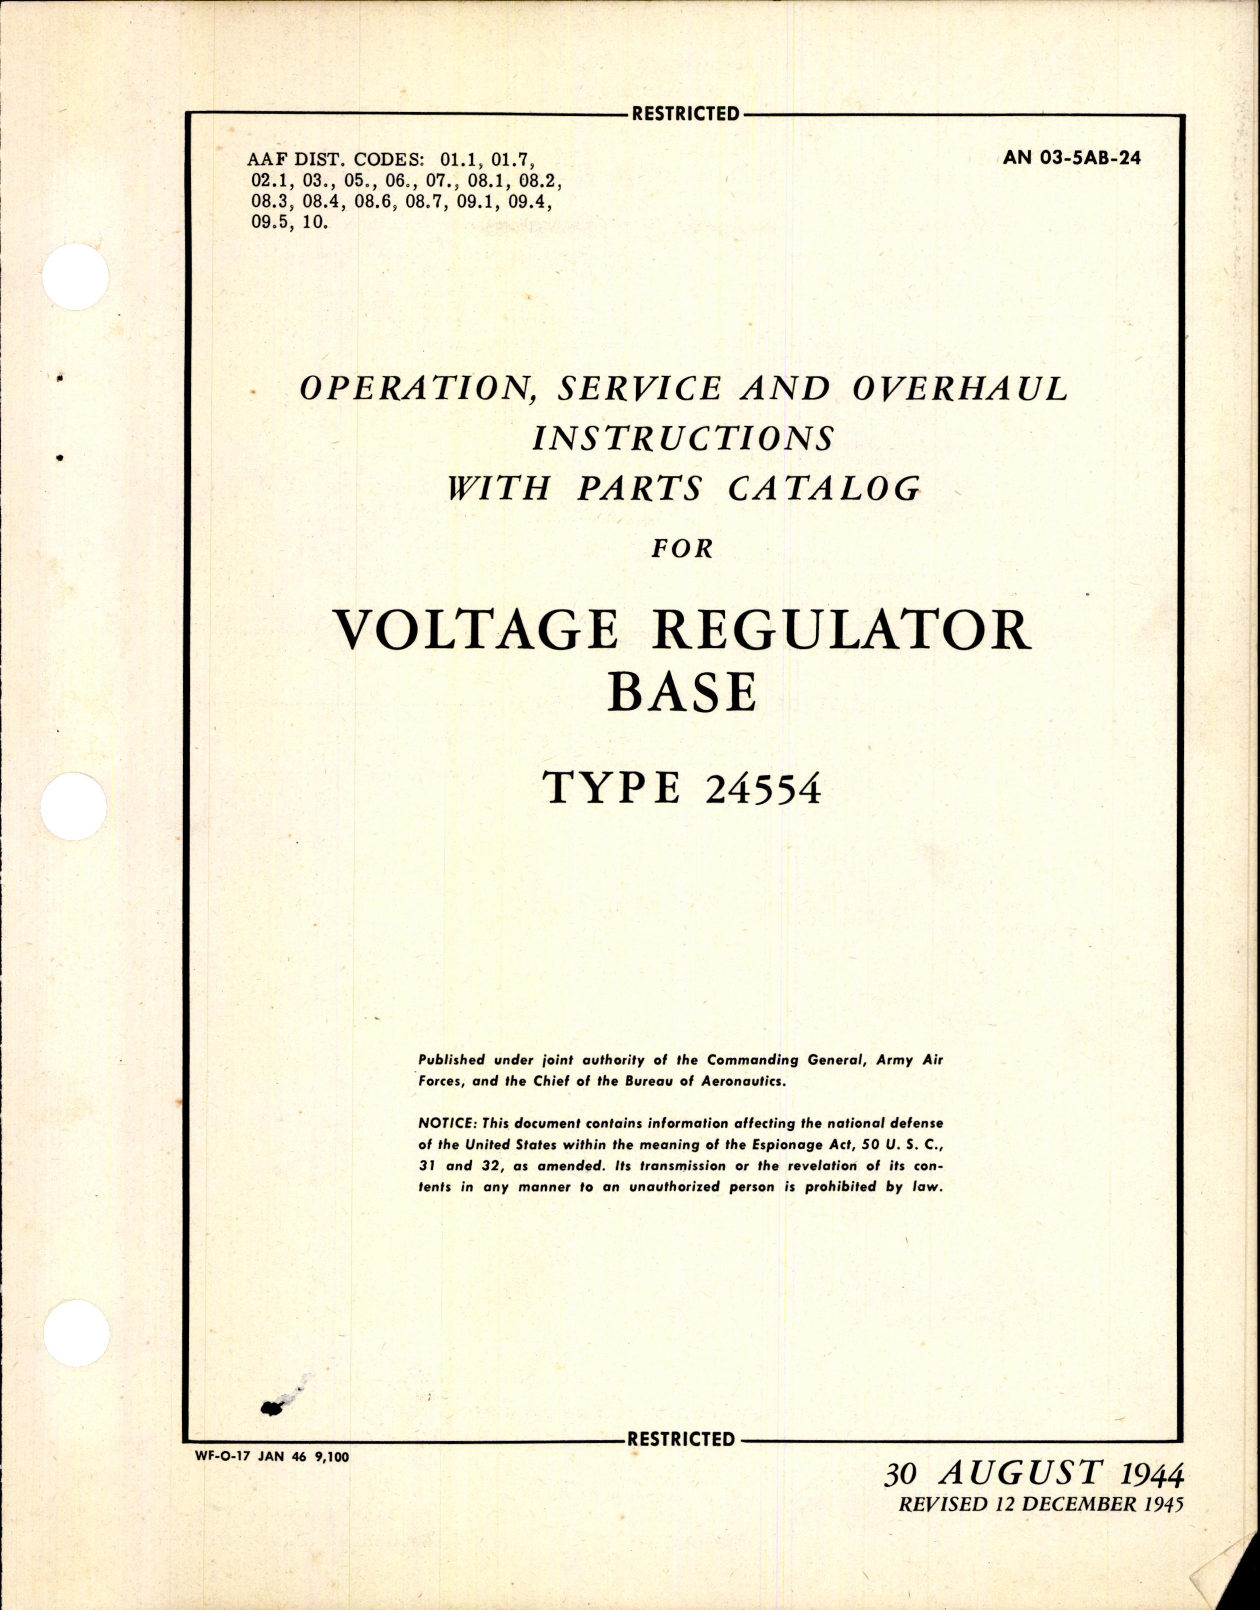 Sample page 3 from AirCorps Library document: Instructions with Parts Catalog for Voltage Regulator Base